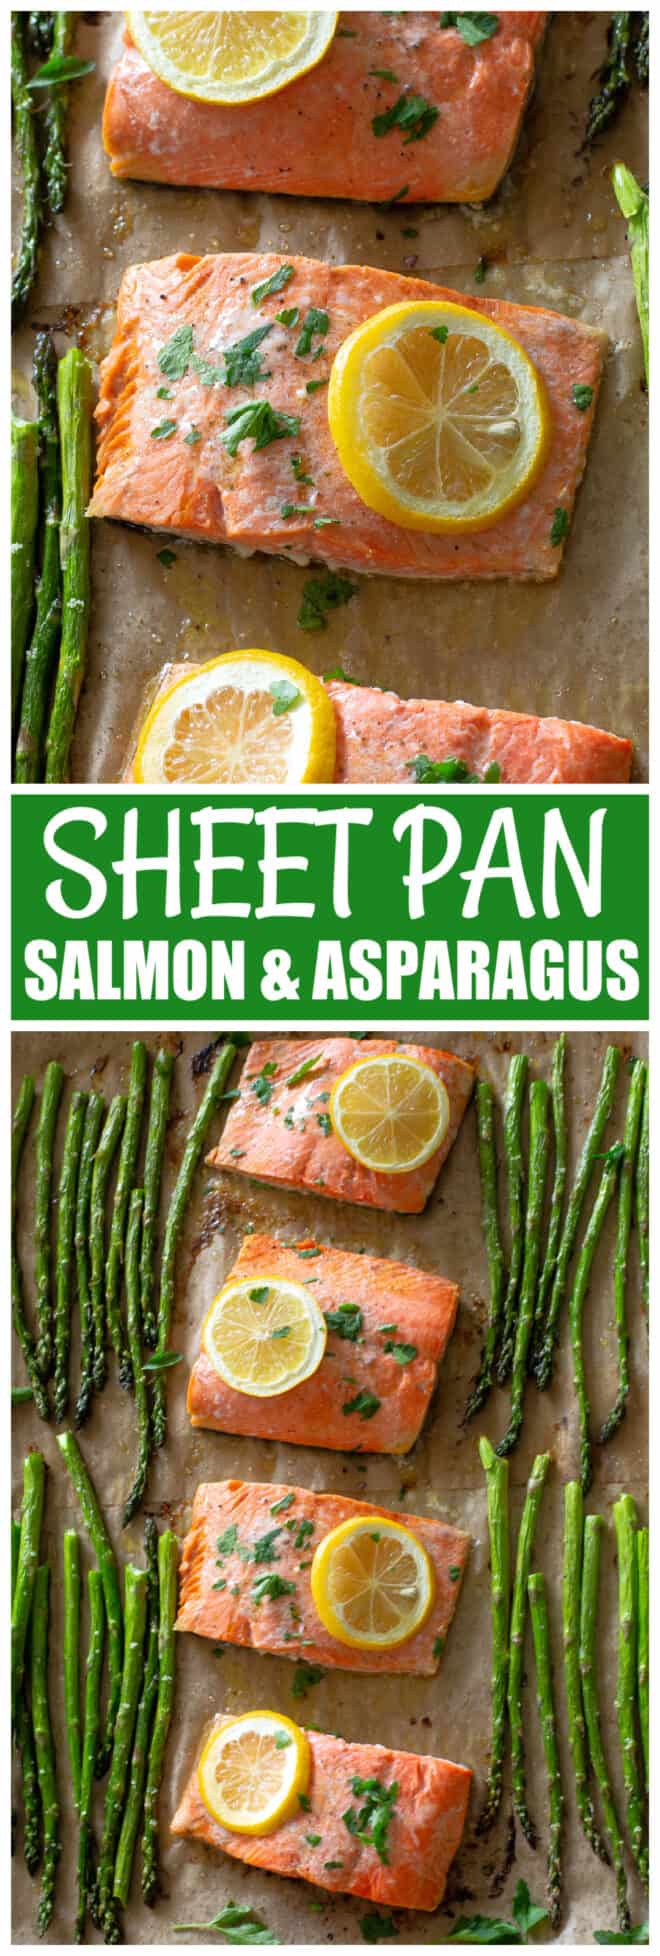 Sheet Pan Salmon and Asparagus | The Girl Who Ate Everything